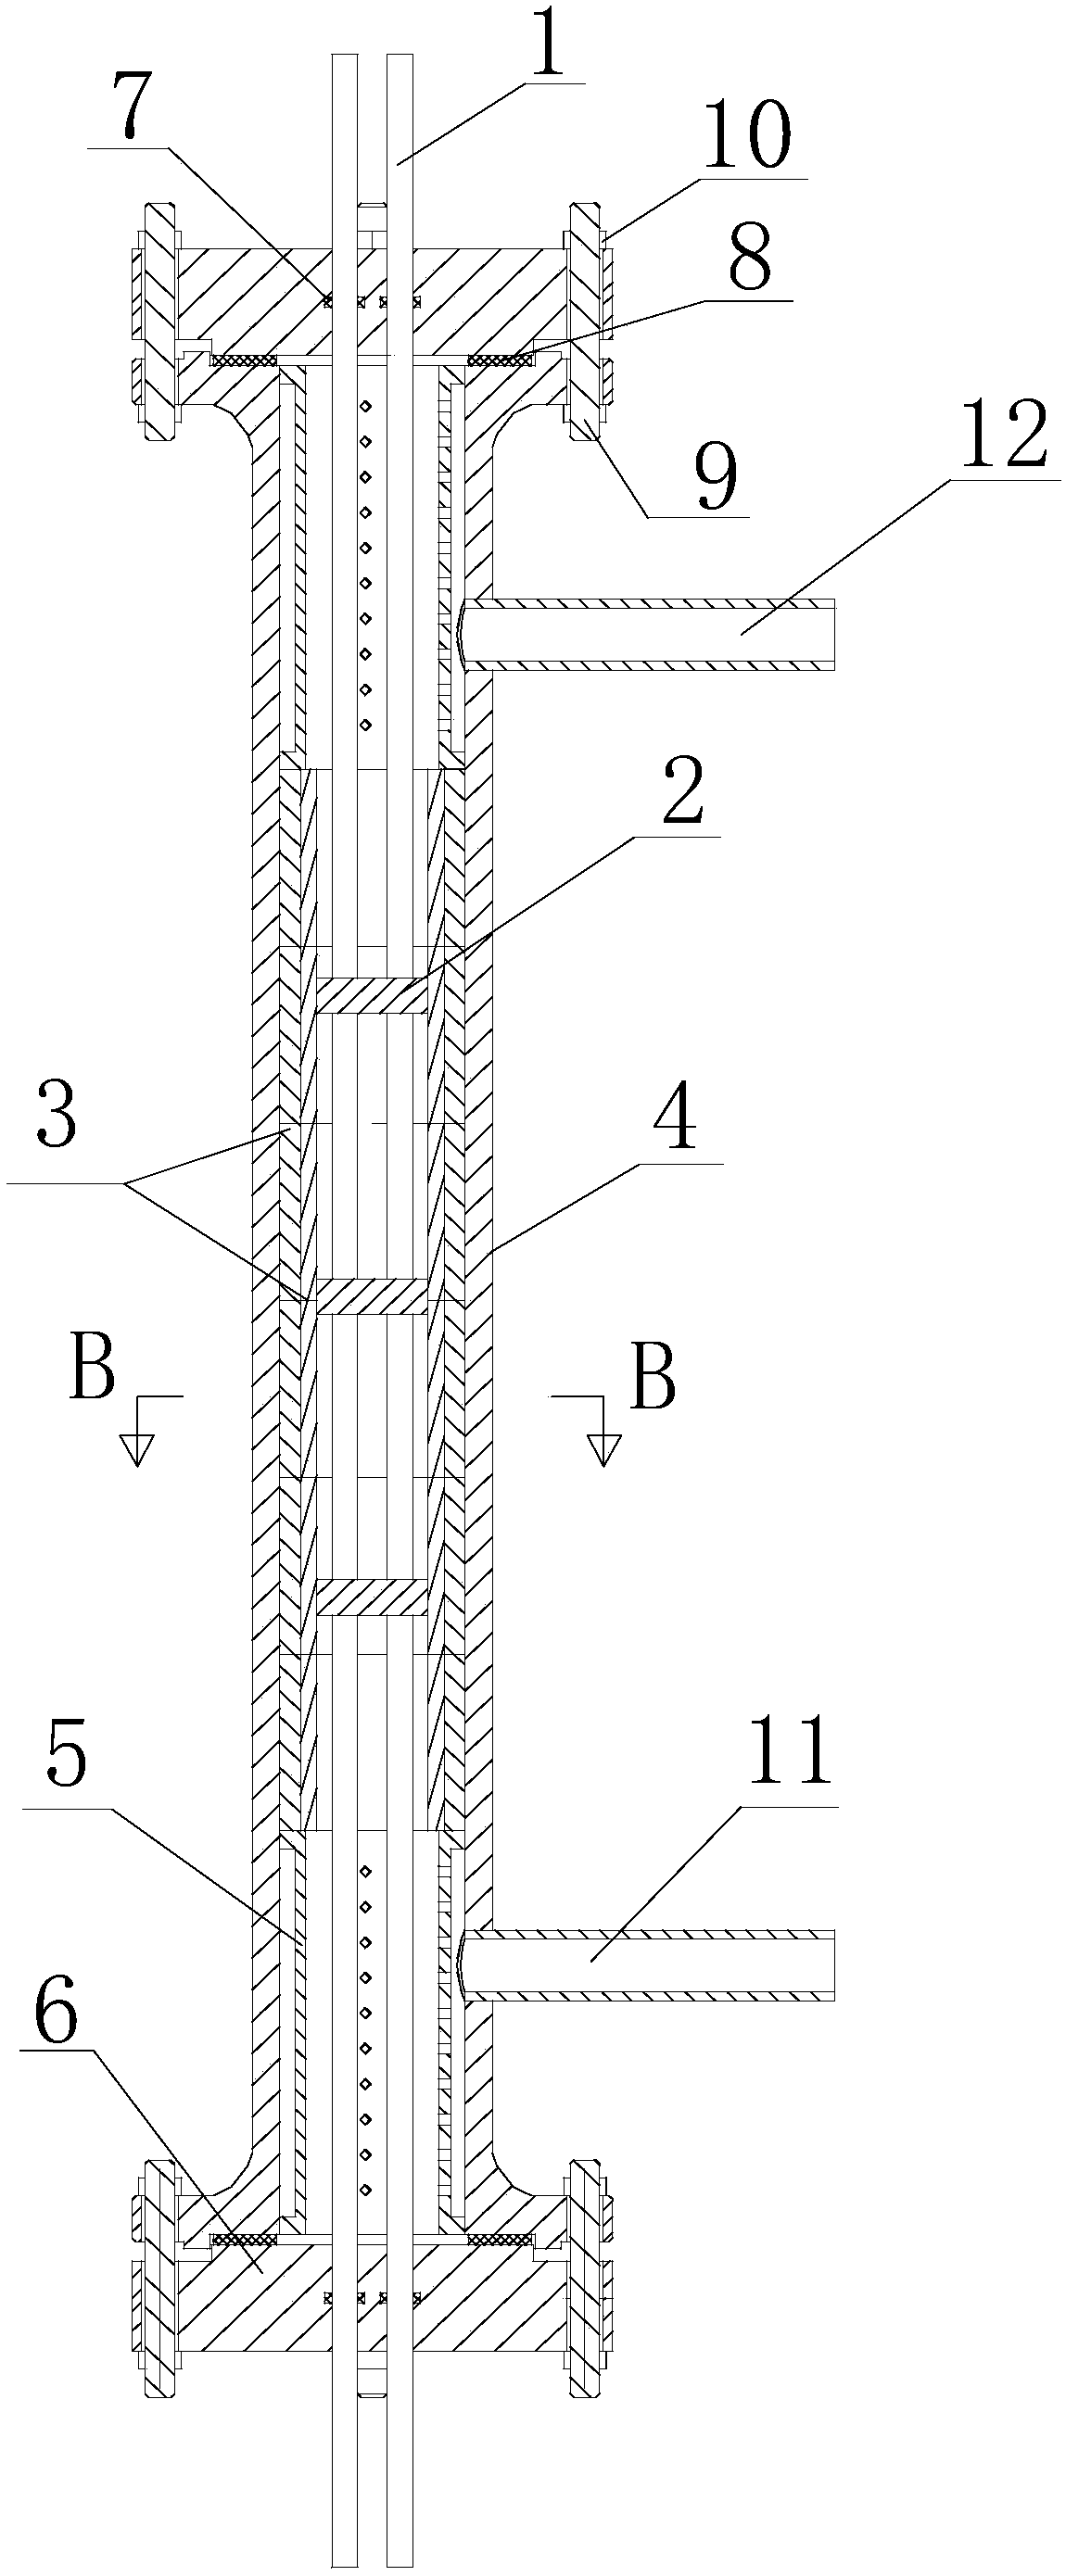 Simulation device for high temperature resistant rod bundle fuel assembly based on diffusion welding